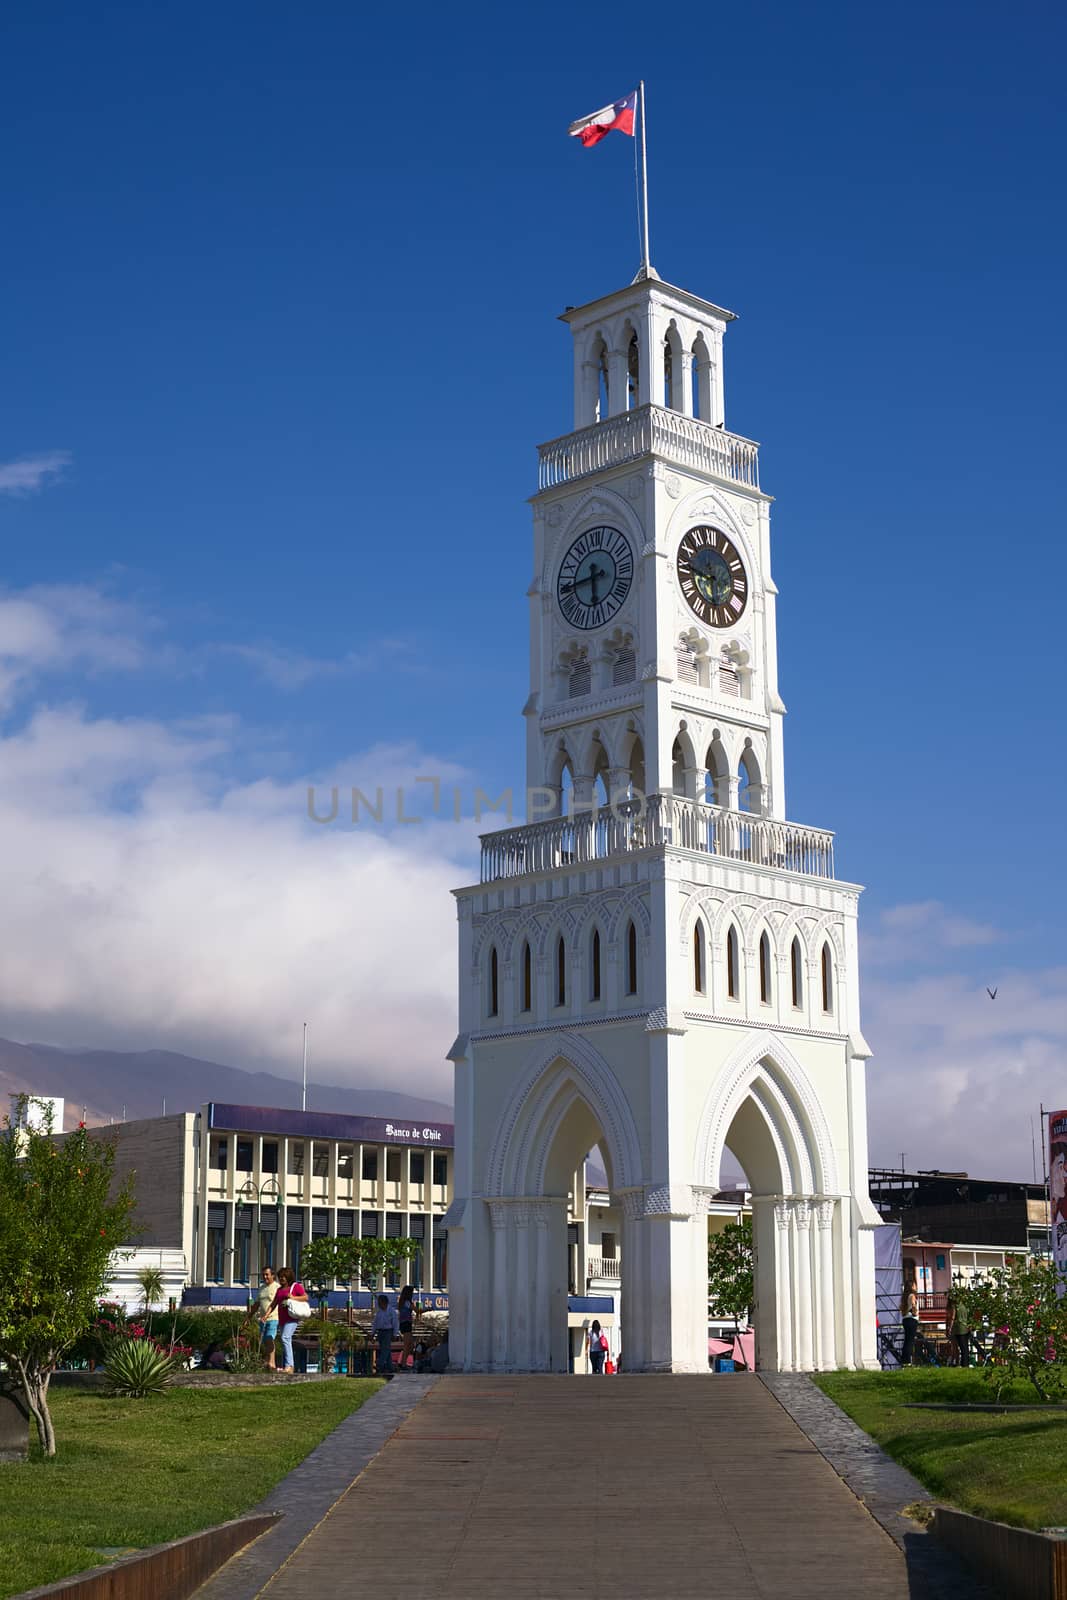 IQUIQUE, CHILE - JANUARY 22, 2015: The Torre Reloj (clock tower) from the year 1877 on Plaza Prat main square on January 22, 2015 in Iquique, Chile. Iquique is a free port city in Northern Chile. 